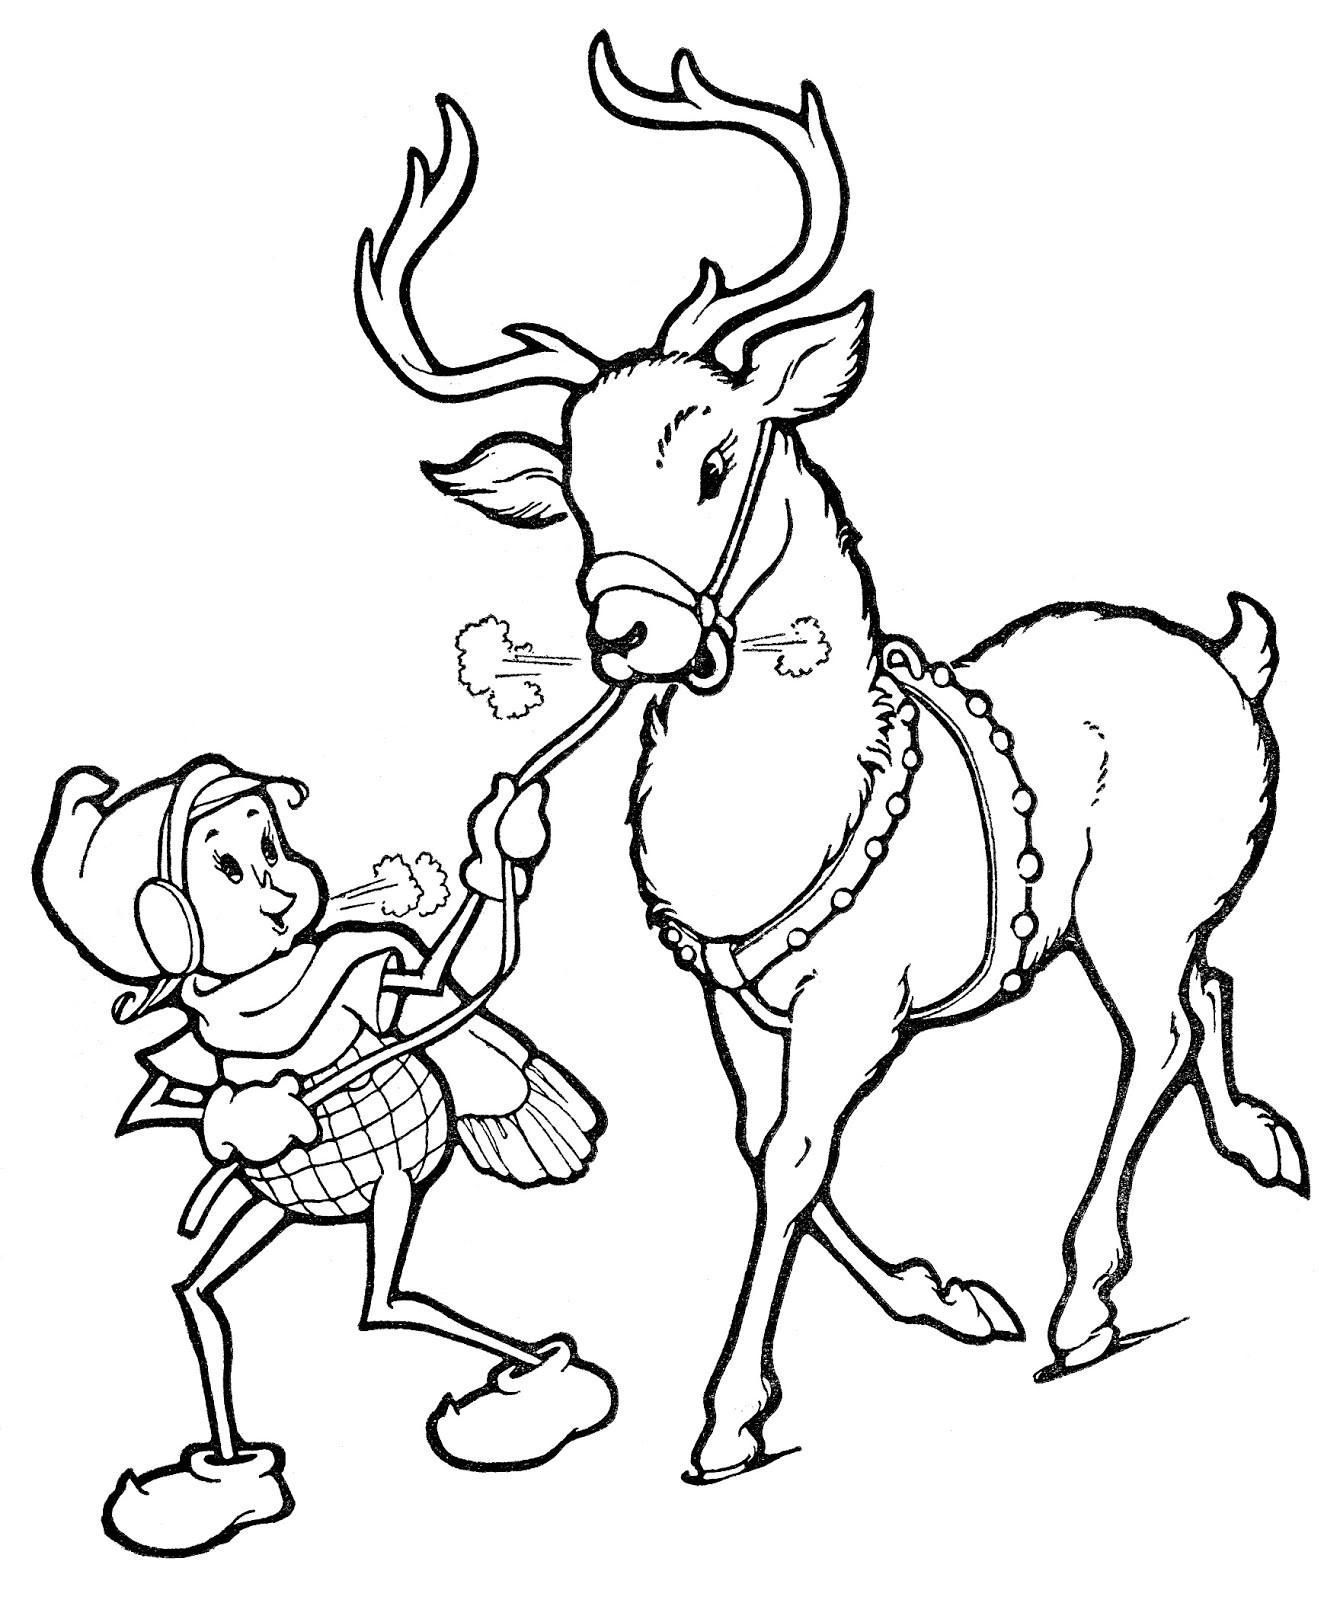 Coloring Pages For Christmas Reindeer at